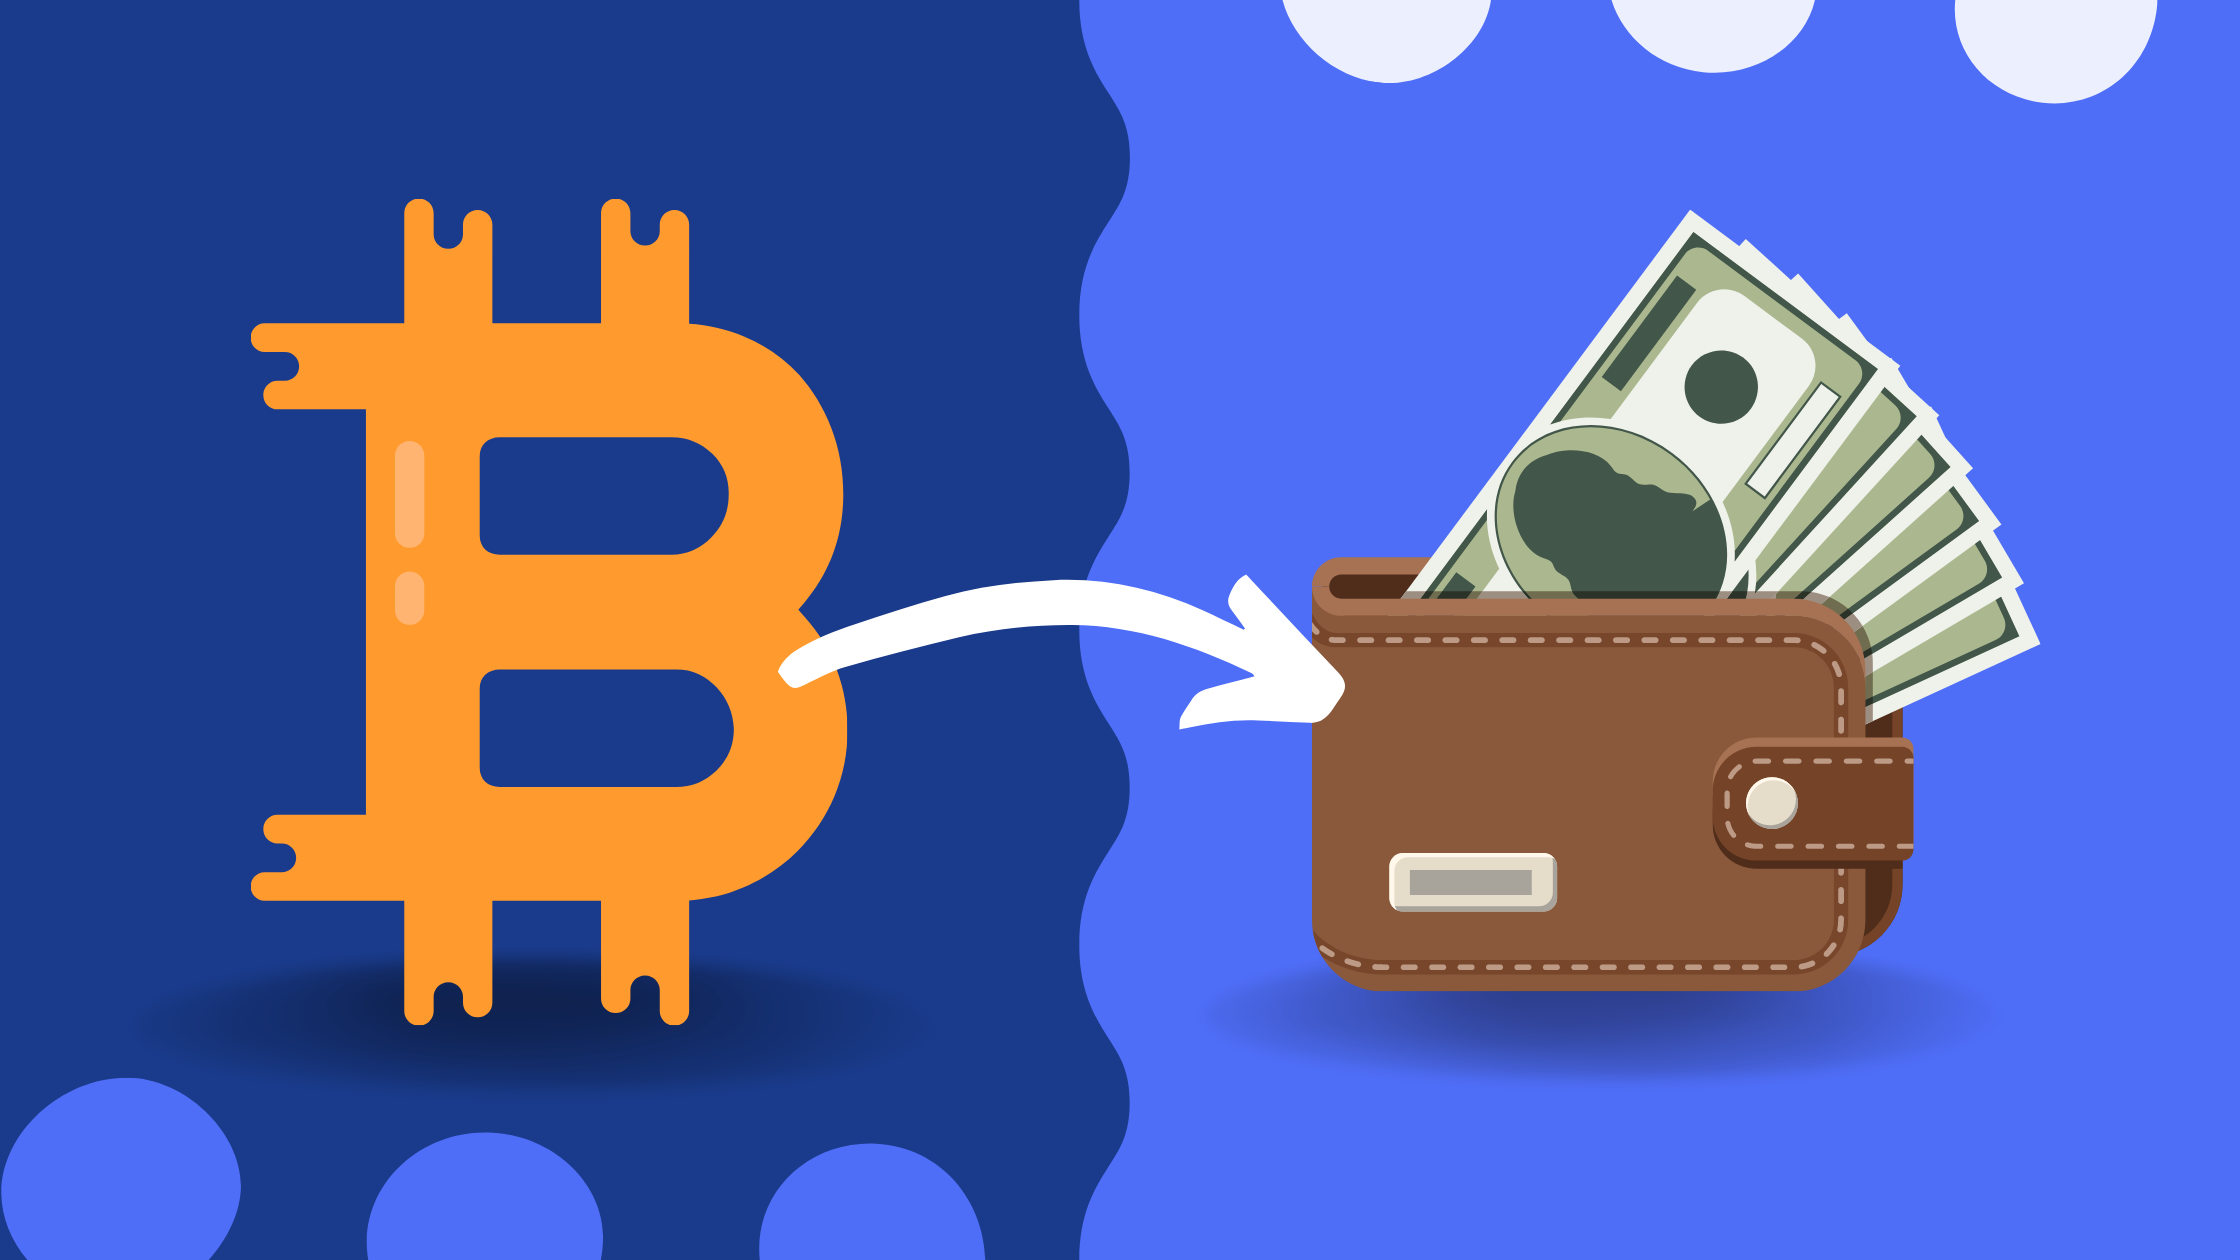 Here's how you convert your cryptocurrency into cash